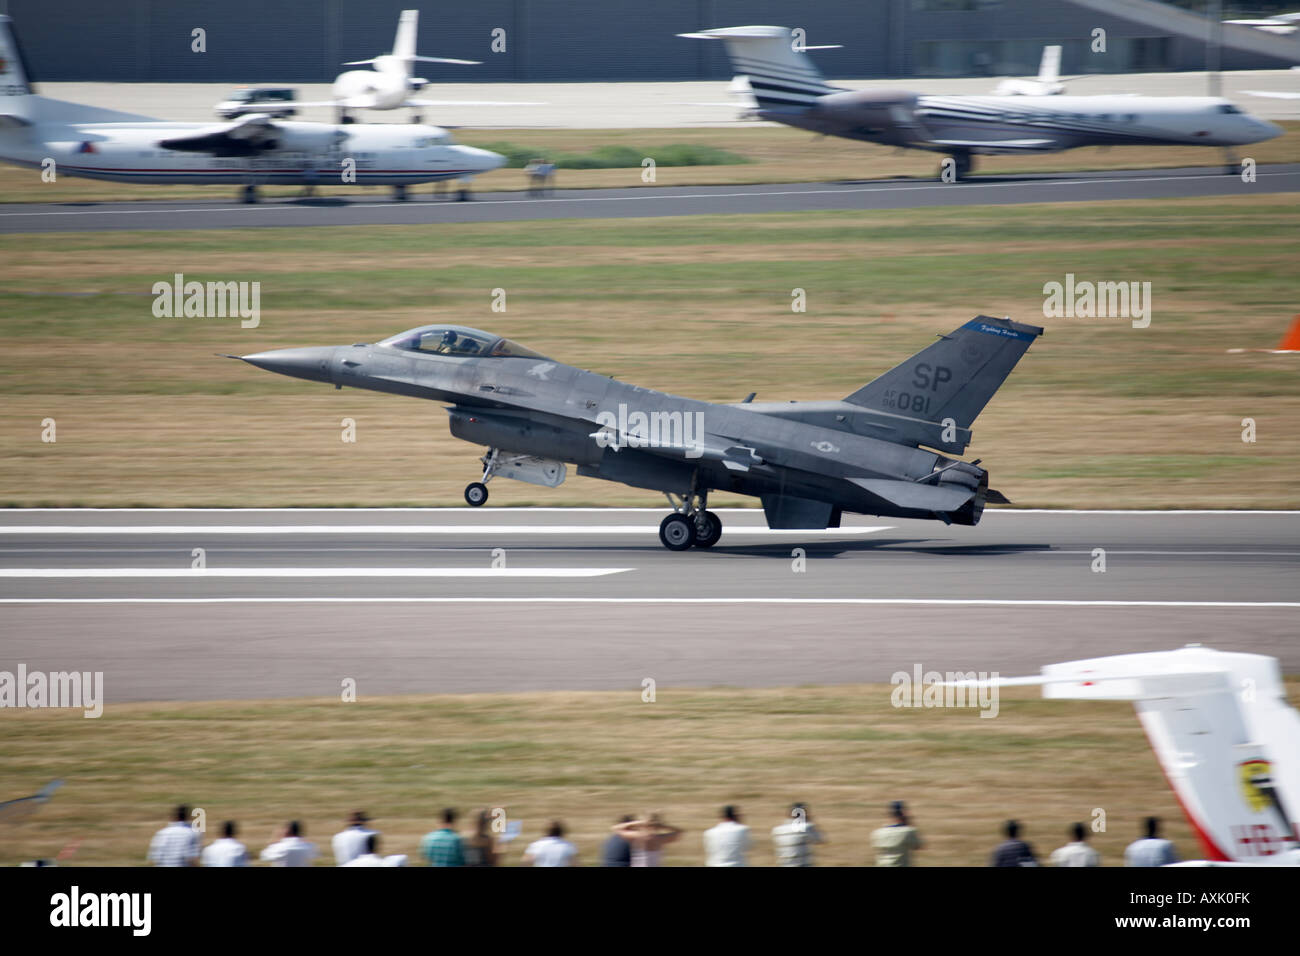 F 16 Fighting Falcon aircraft landing after flying display at Farnborough International Airshow July 2006 Stock Photo